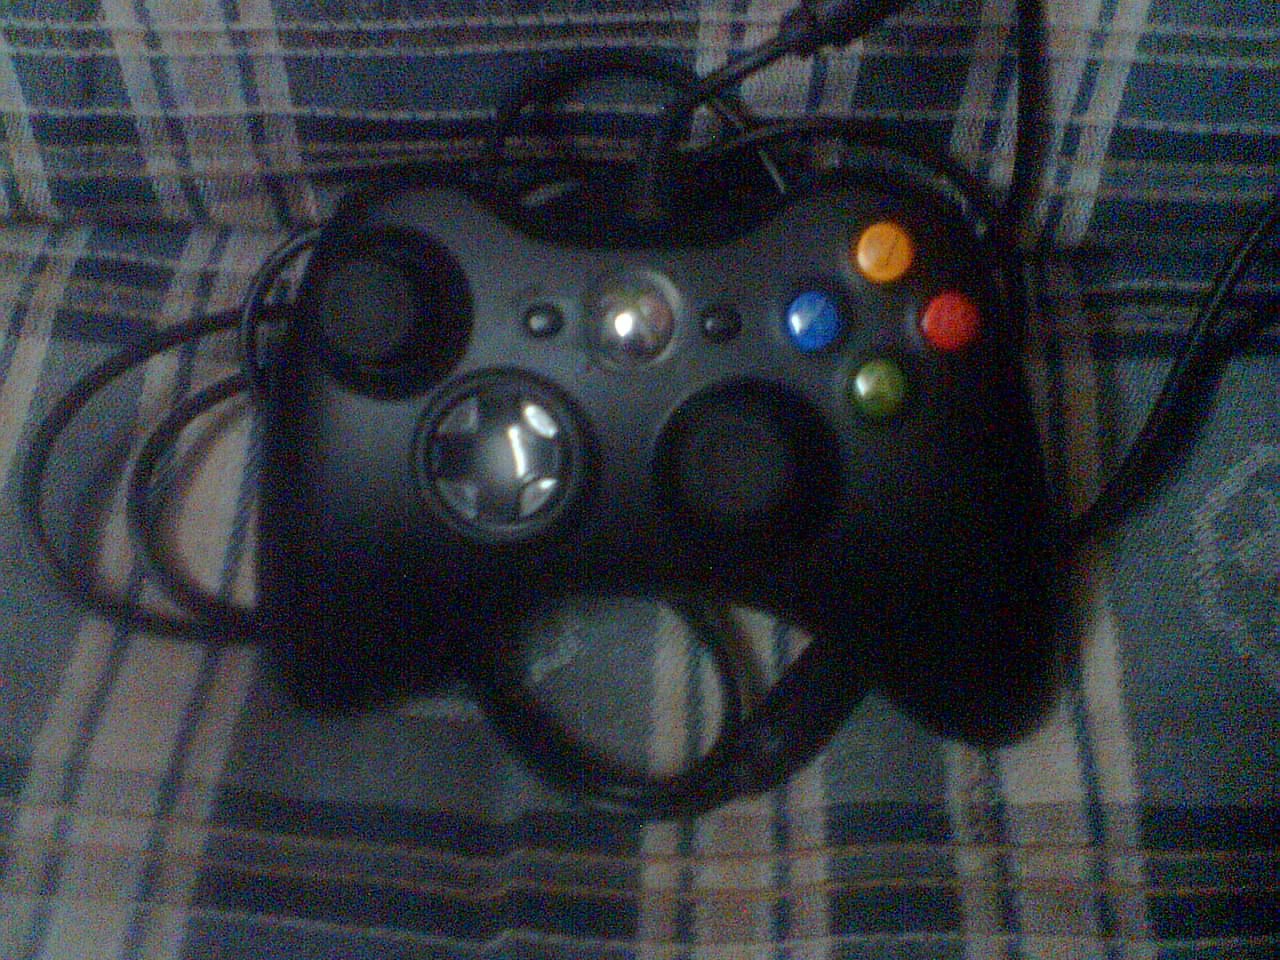 XBOX 360 controller for Windows from Microsoft  large image 0